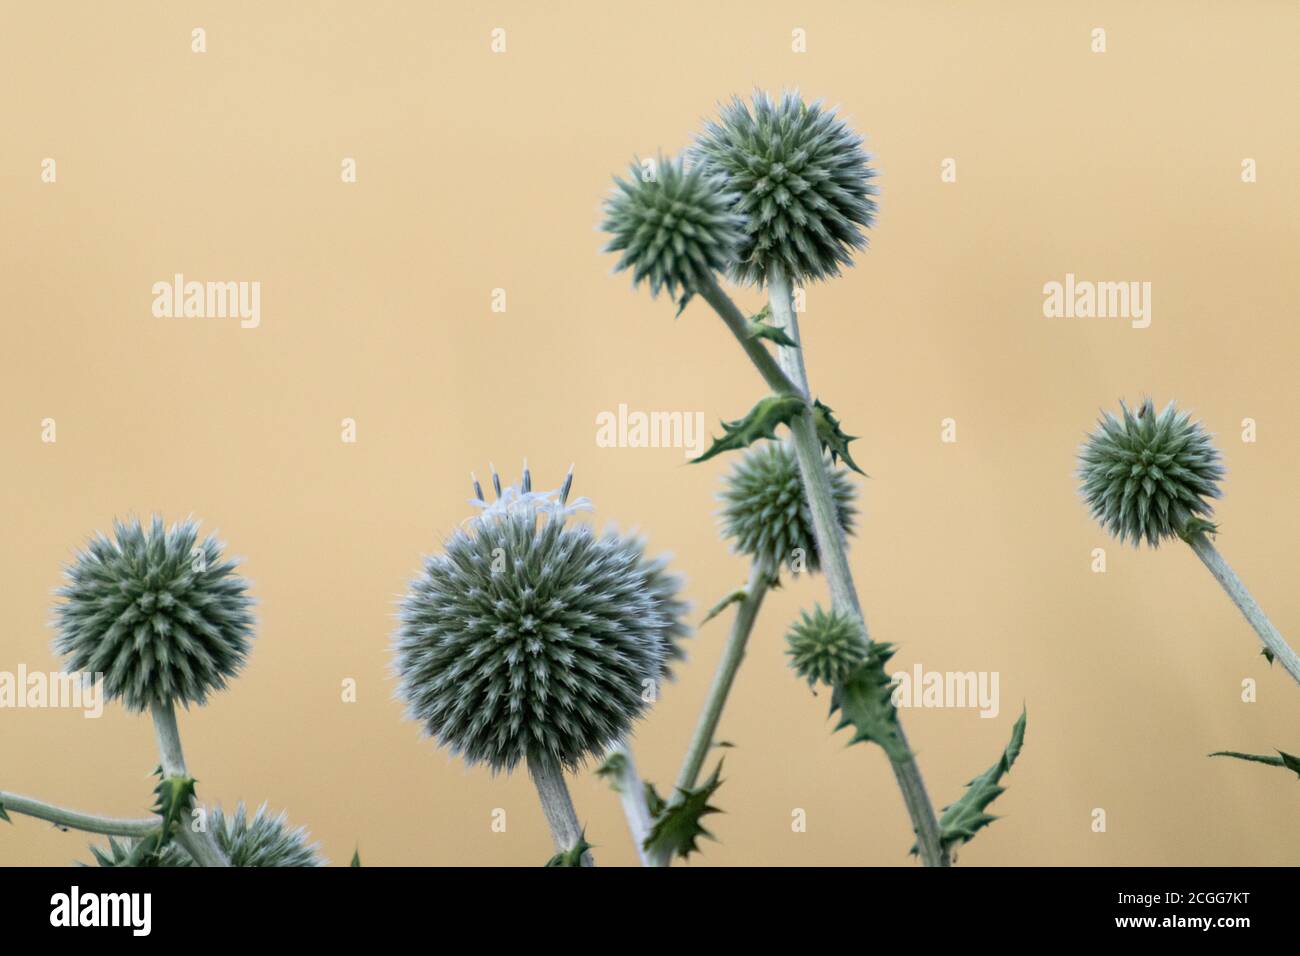 Globe thistle ball-shaped green flowers macro. Echinops ritro prickly grass on blurred beige yellow background. Copy space natural modern detailed her Stock Photo